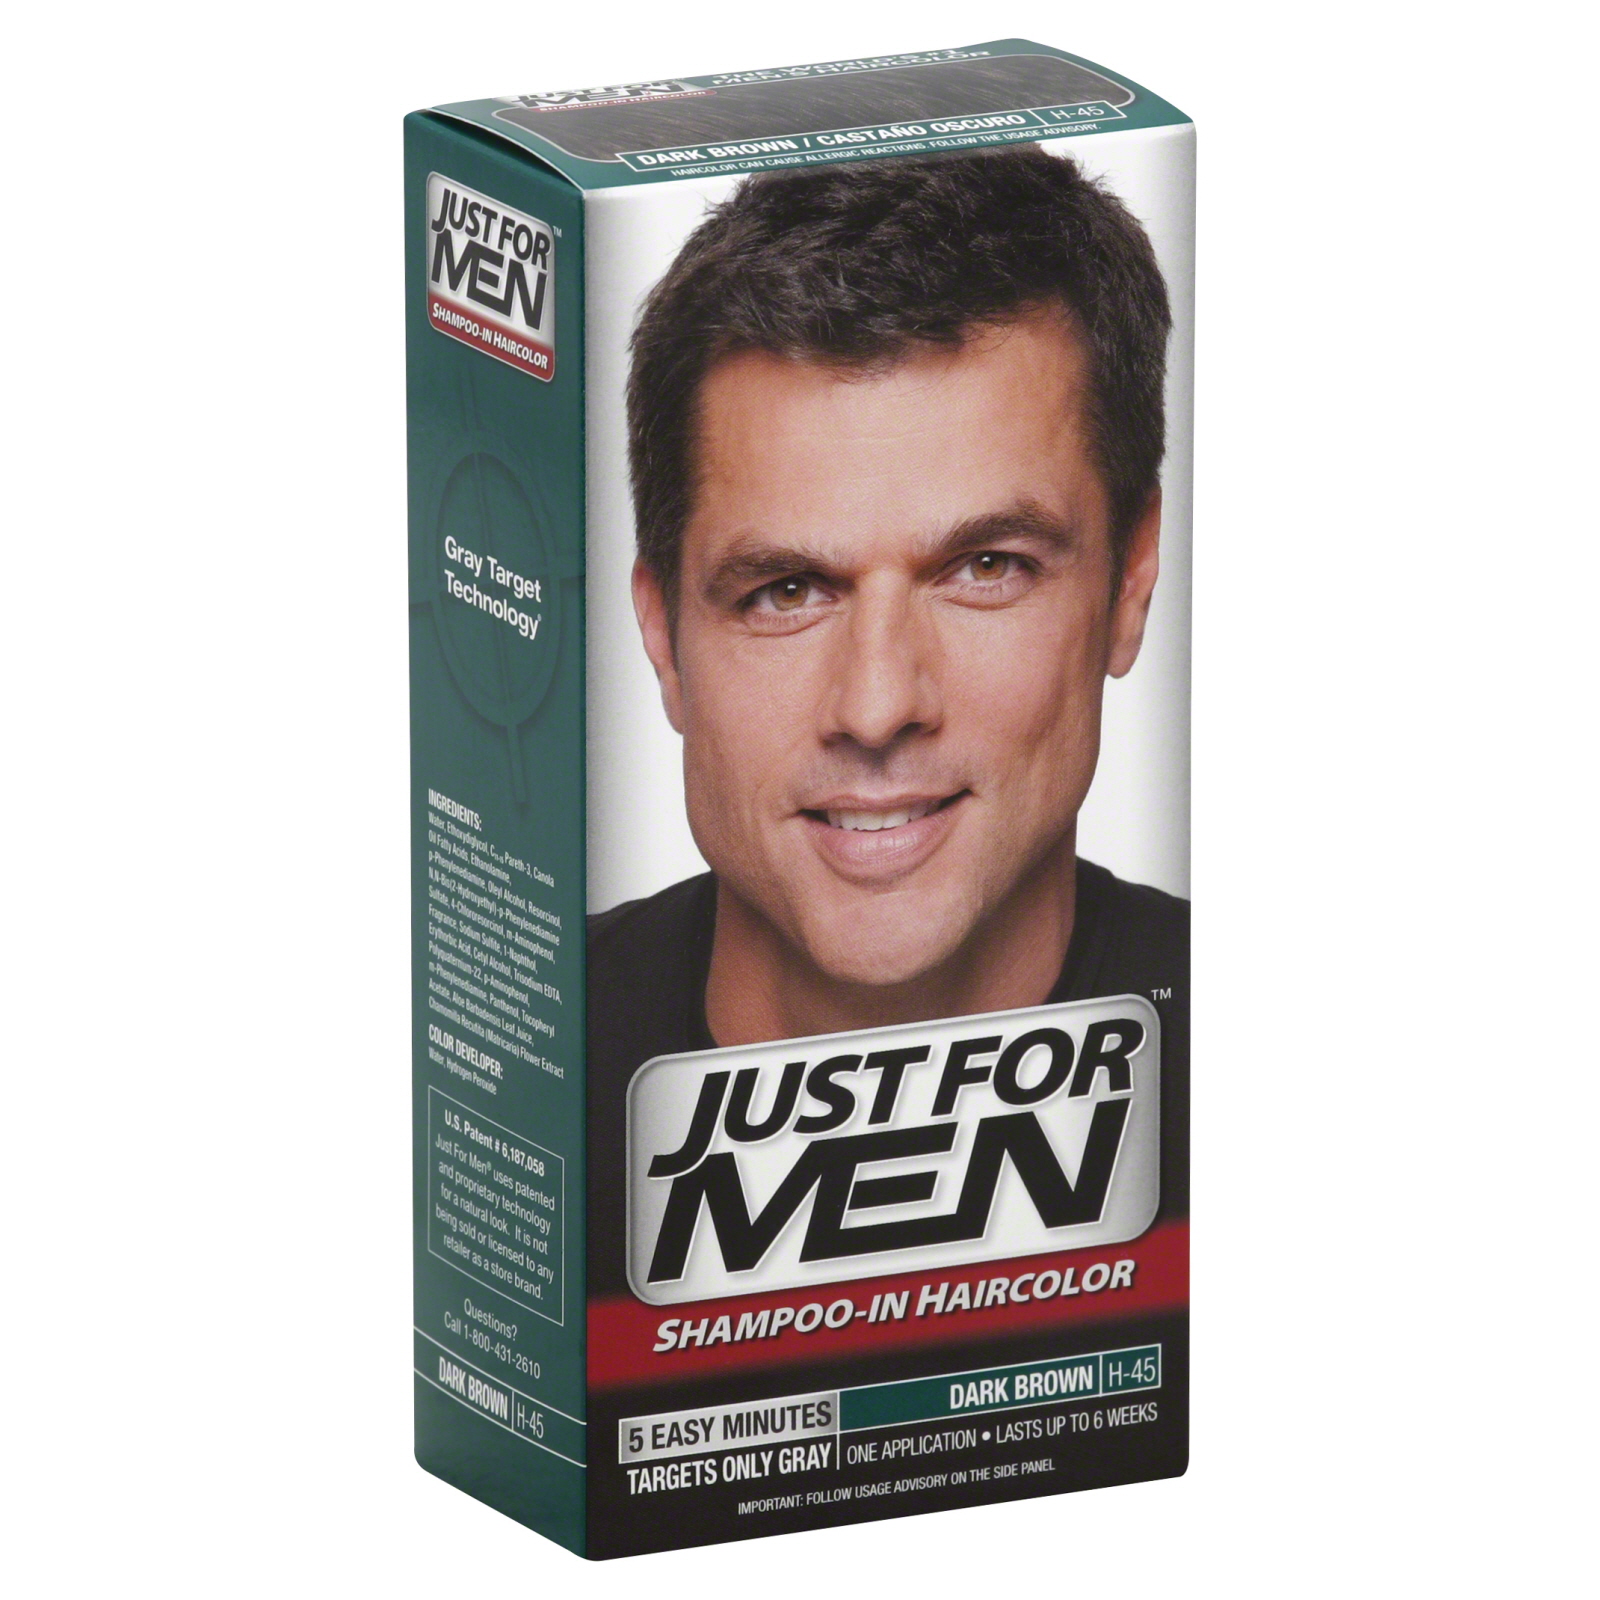 Just For Men Shampoo-In Haircolor, 1 application